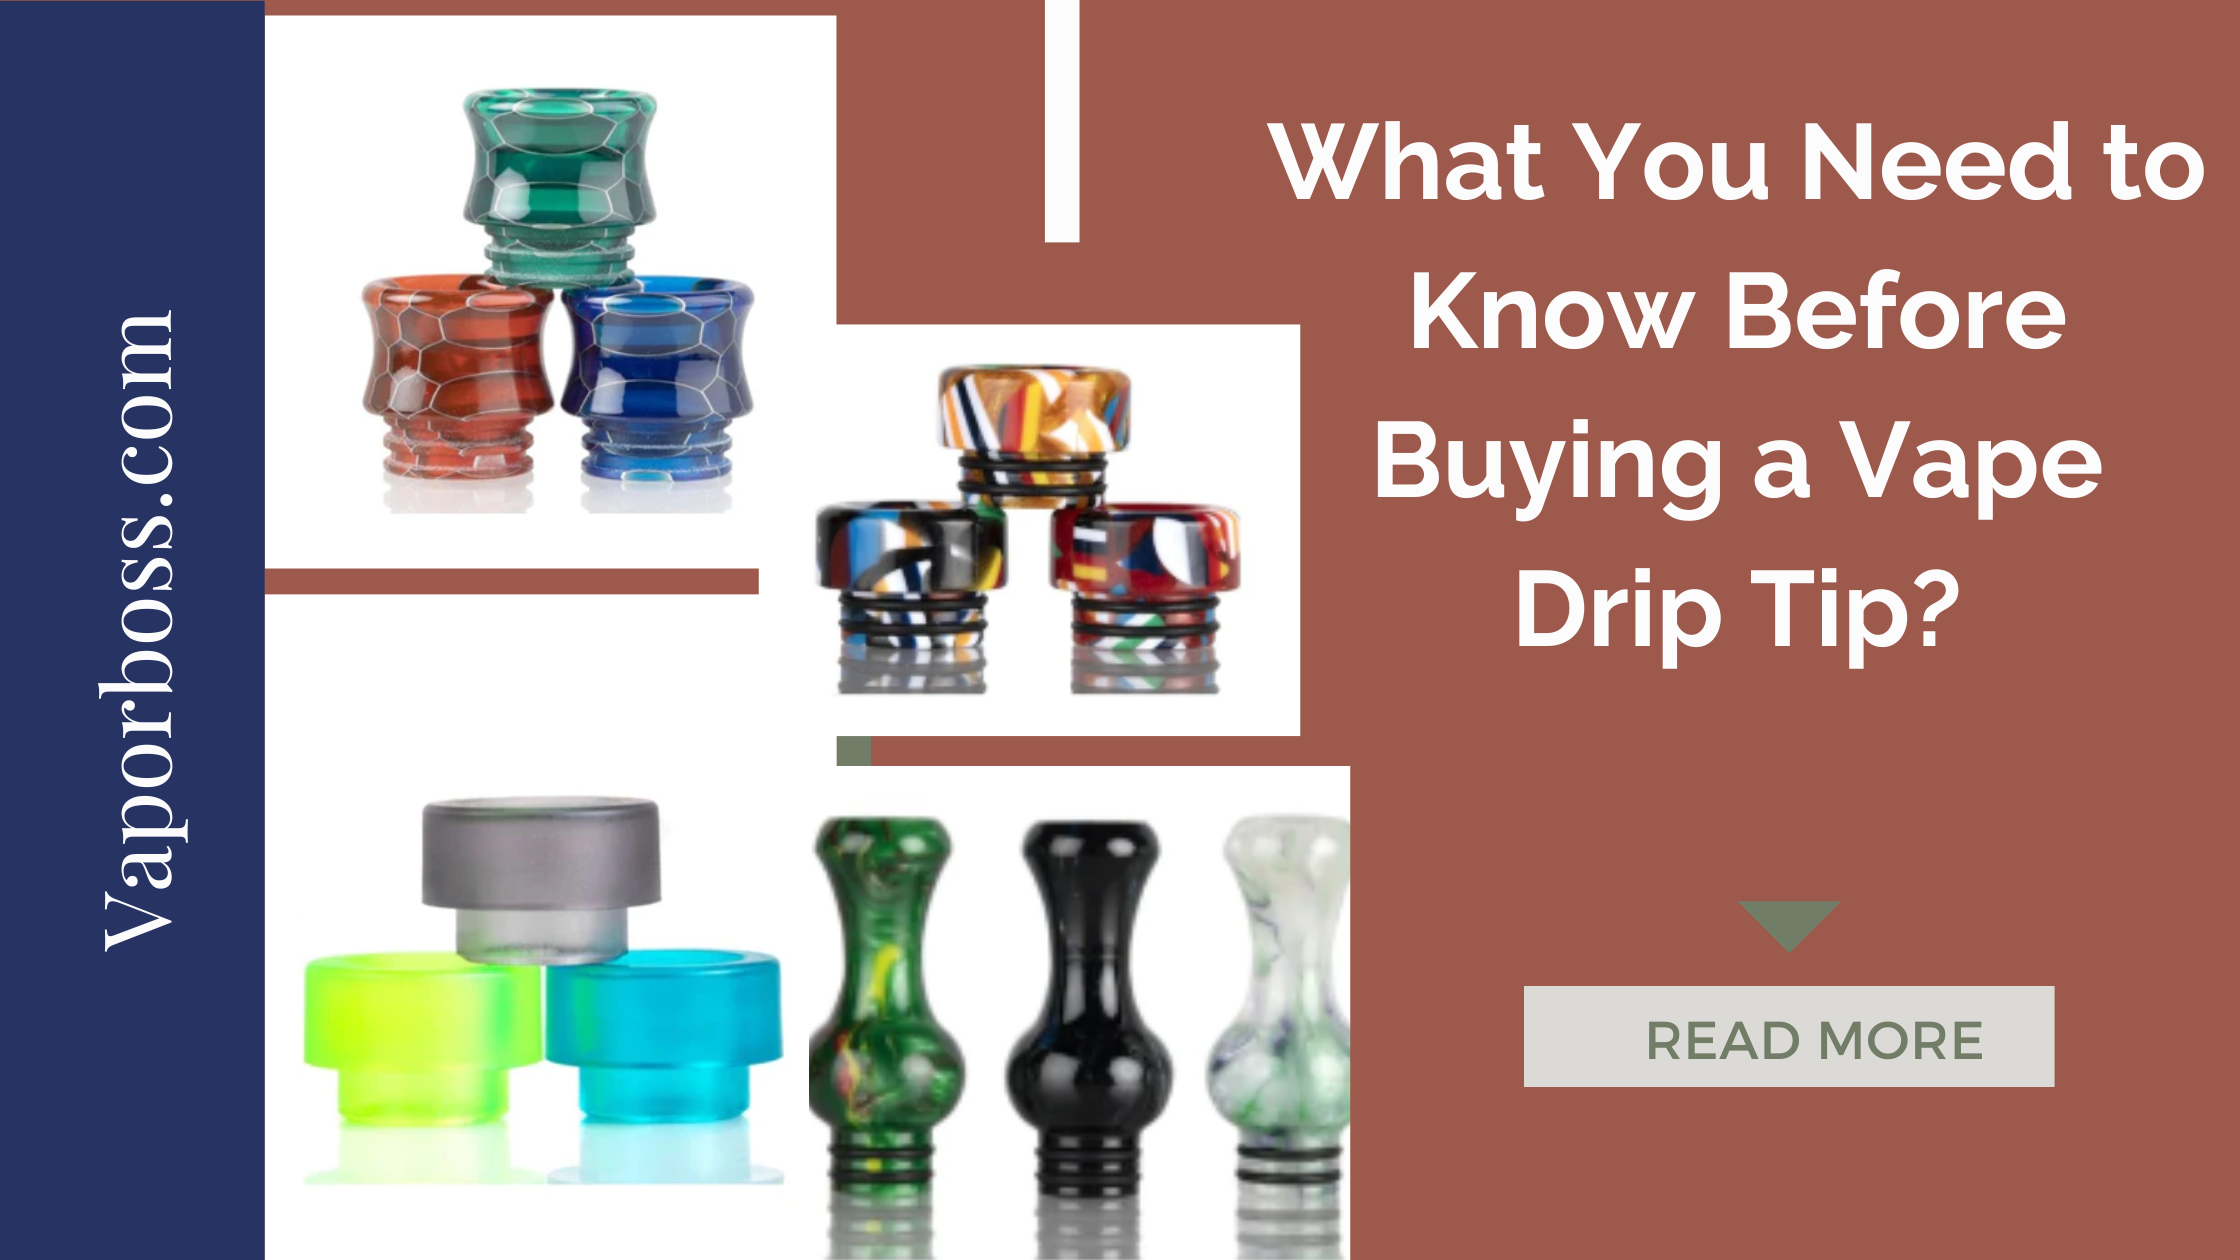 What You Need to Know Before Buying a Vape Drip Tip